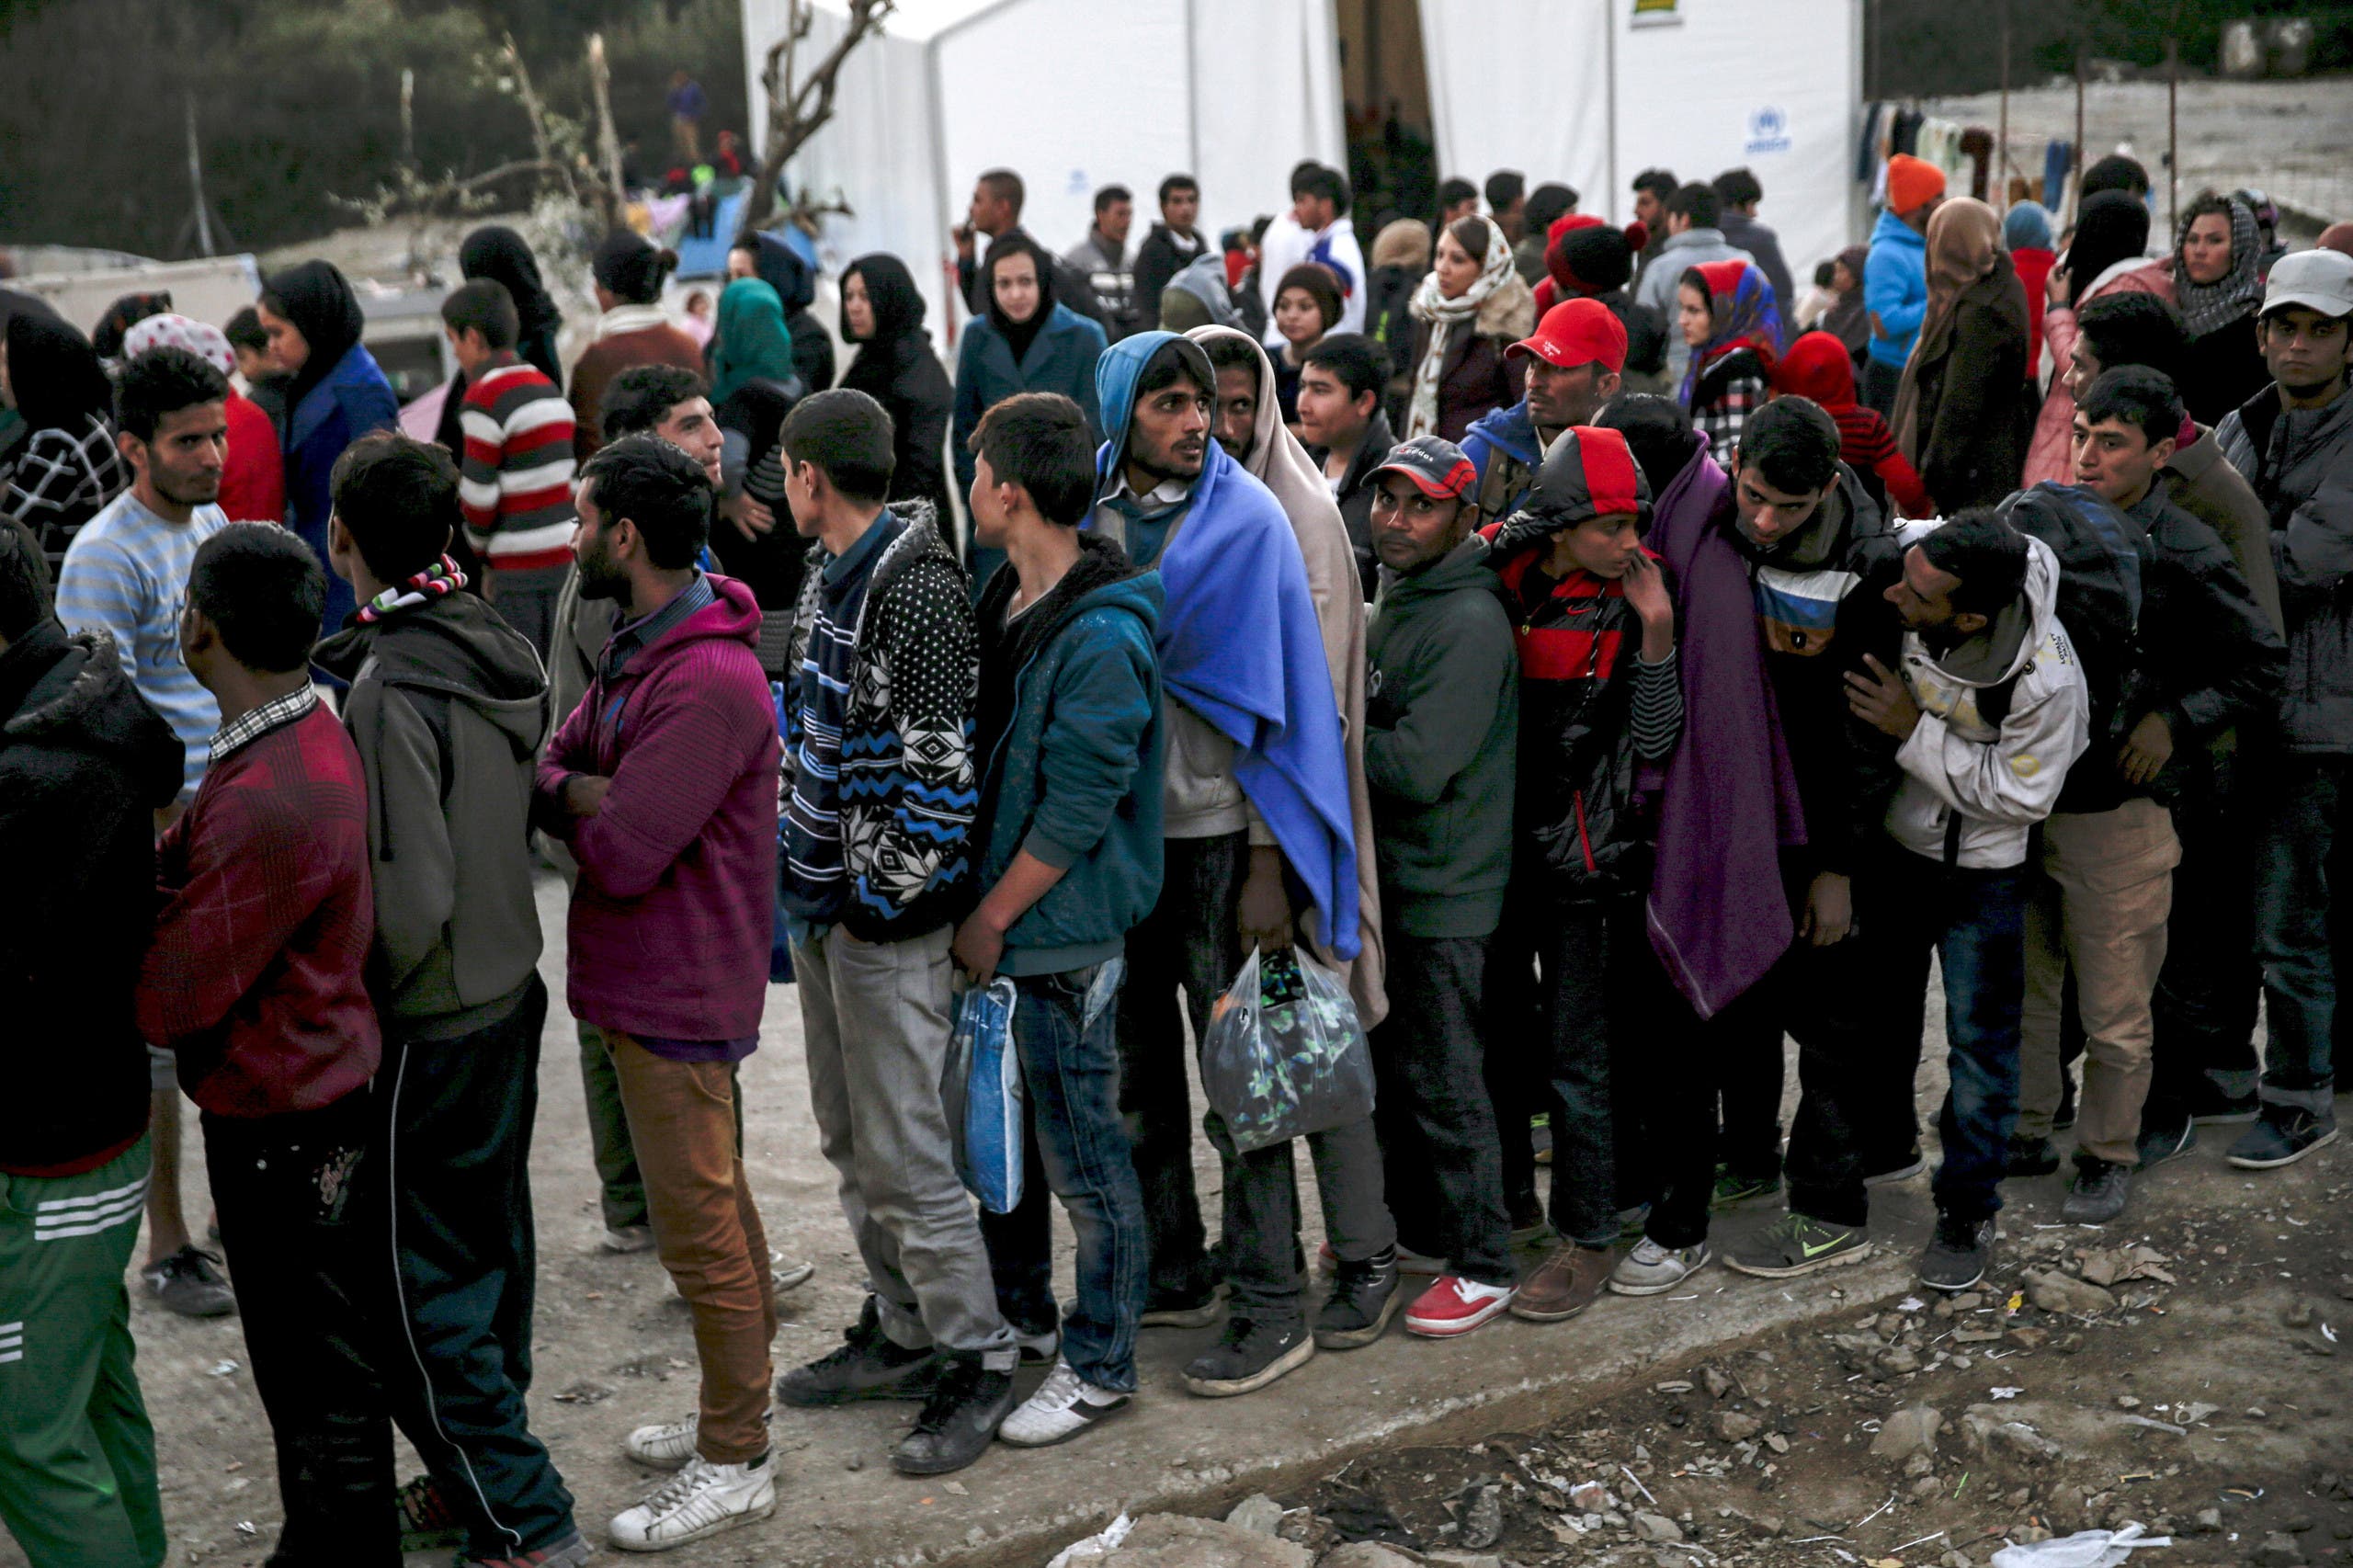 Refugees and migrants line up for a food distribution at the Moria refugee camp on the Greek island of Lesbos, November 5, 2015. REUTERS